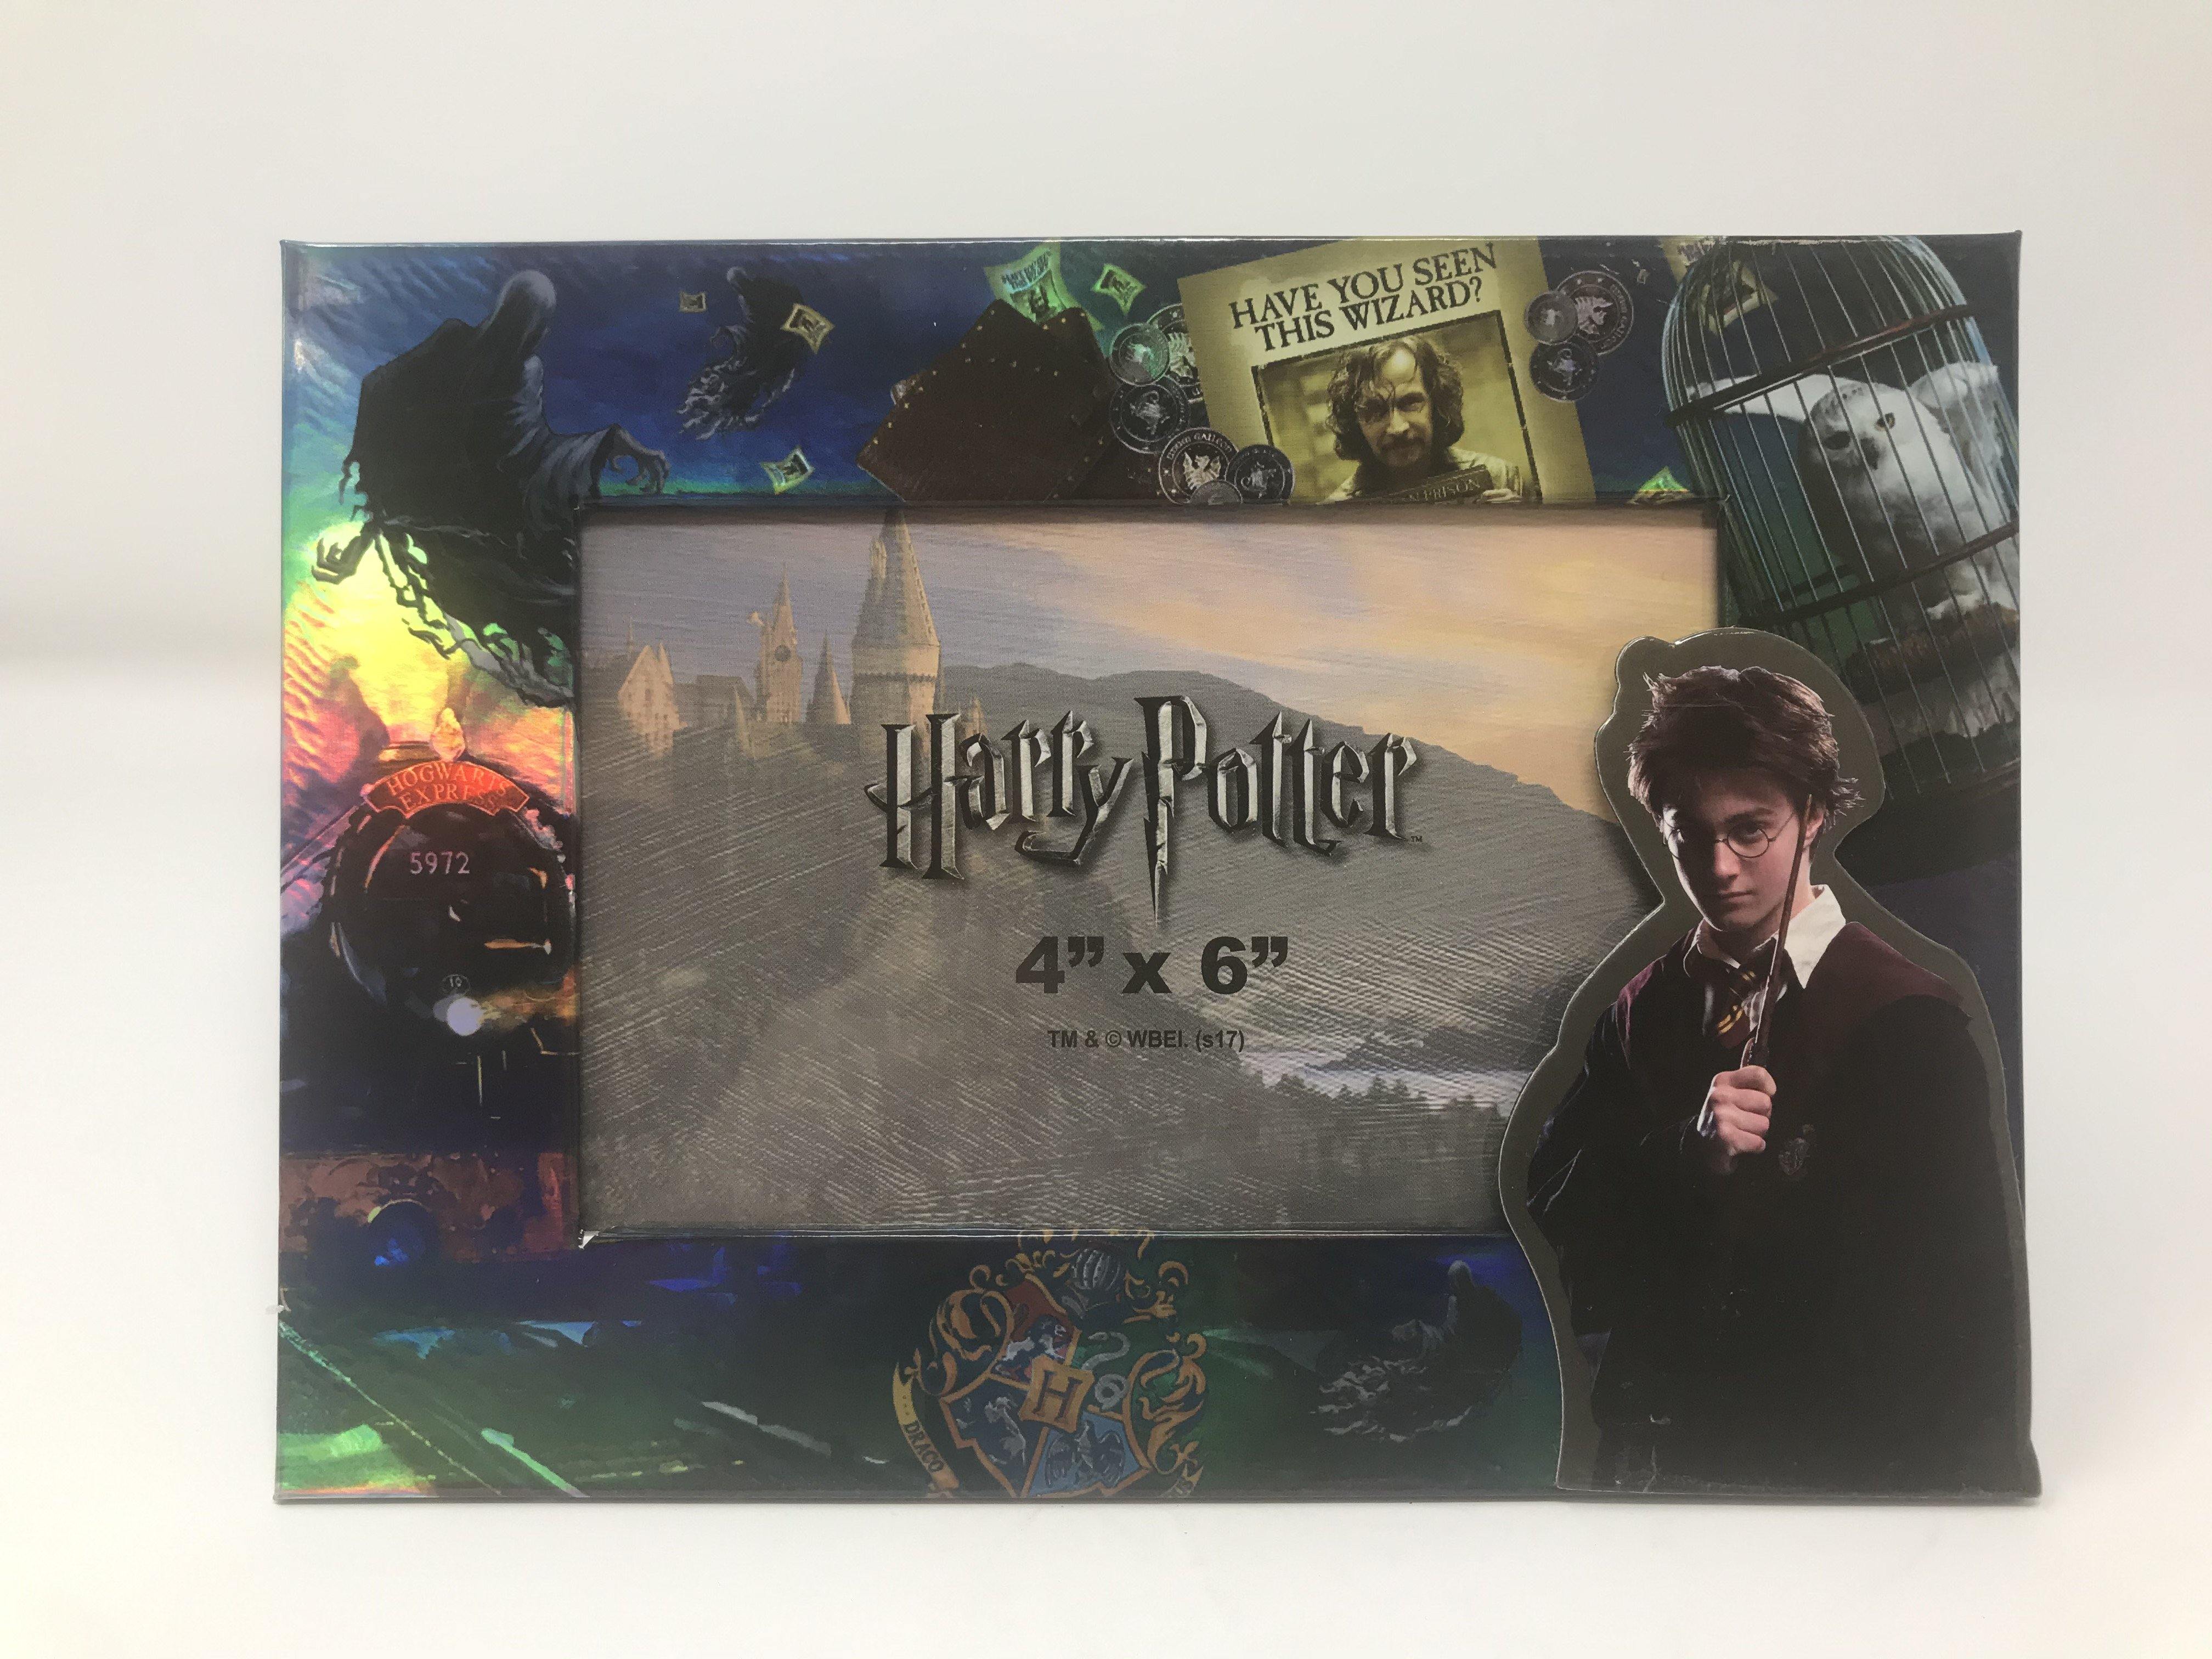 Harry Potter Magnet Cardboard Photo Frame 4"X 6" (Have You seen This Wizard?)